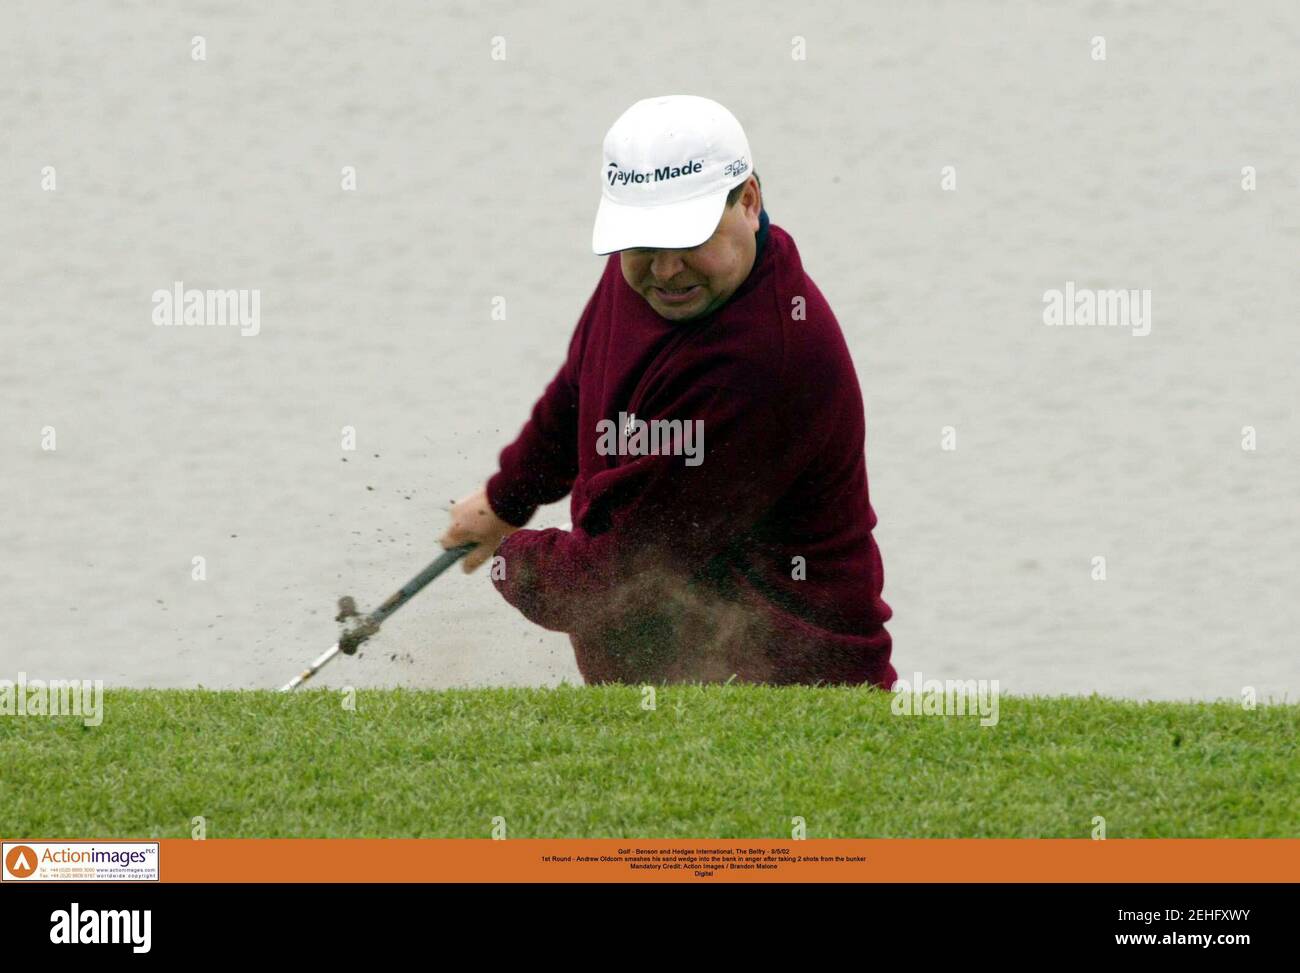 Golf - Benson and Hedges International, The Belfry - 9/5/02  1st Round - Andrew Oldcorn smashes his sand wedge into the bank in anger after taking 2 shots from the bunker  Mandatory Credit: Action Images / Brandon Malone  Digital Stock Photo